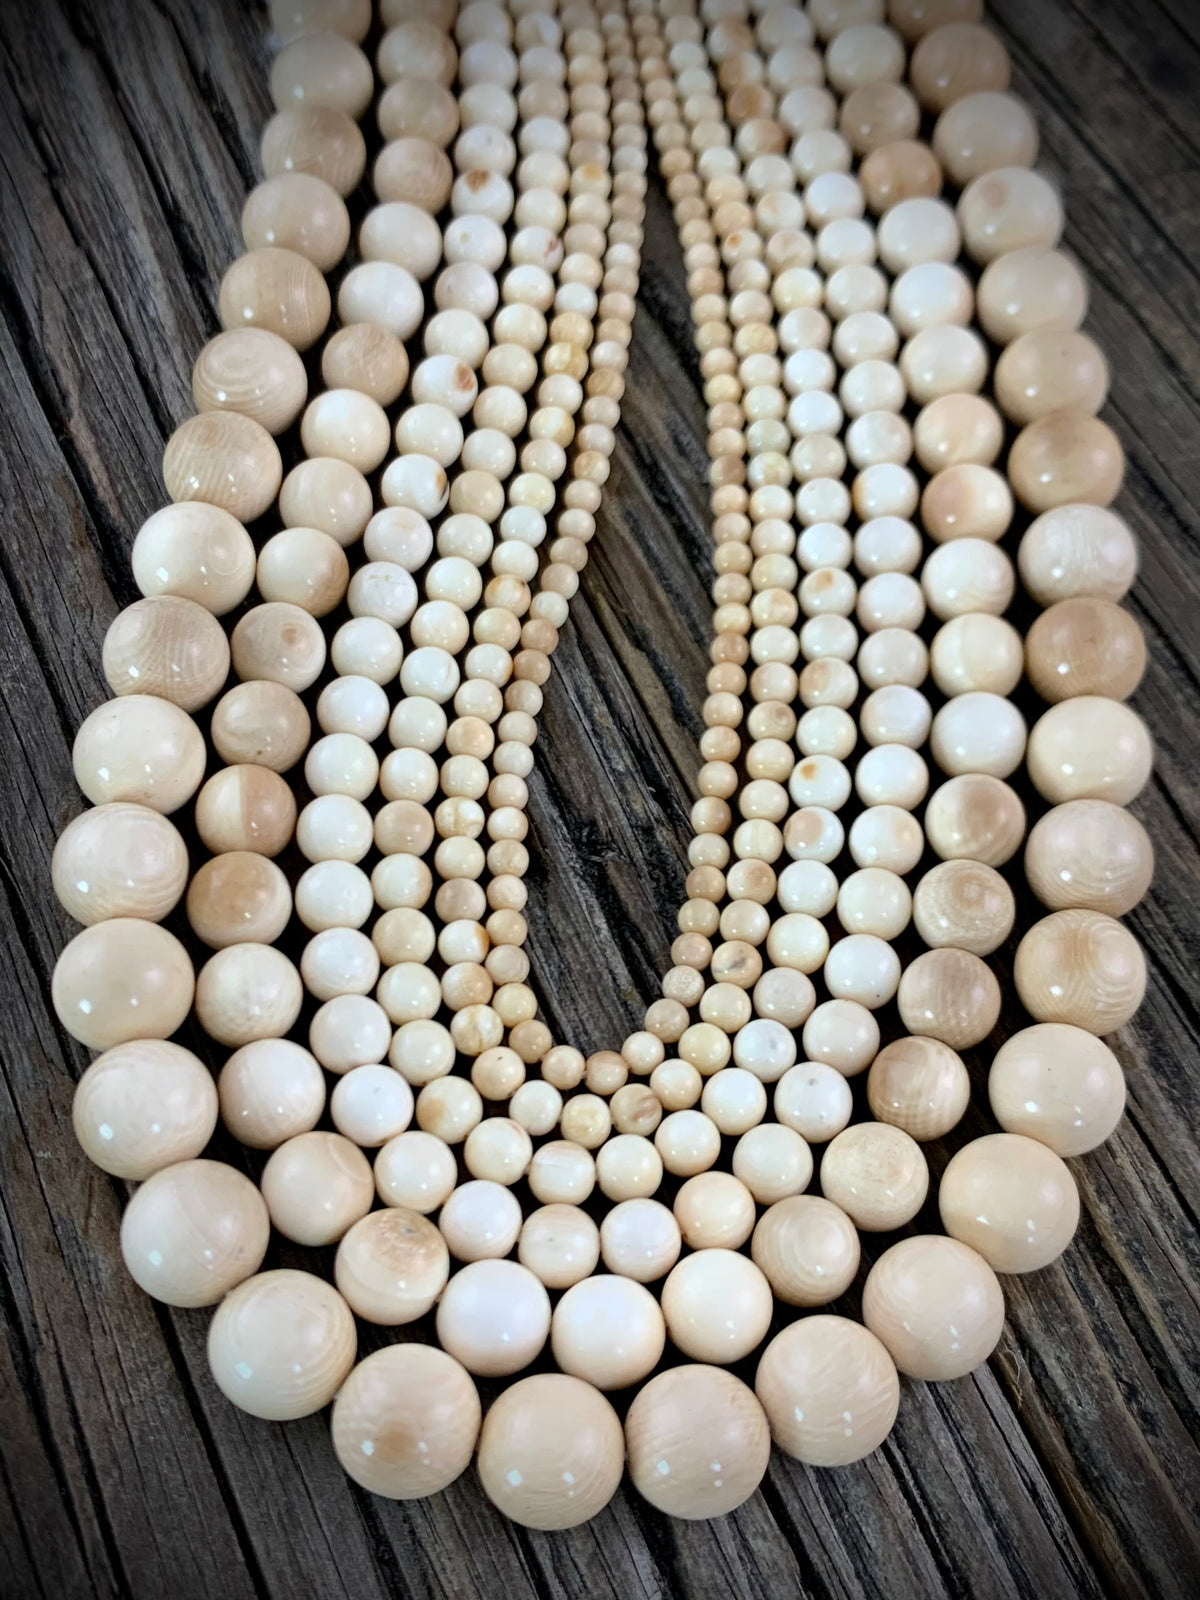 40 24mm White Pointy Tooth Beads Claw Beads Tusk Beads